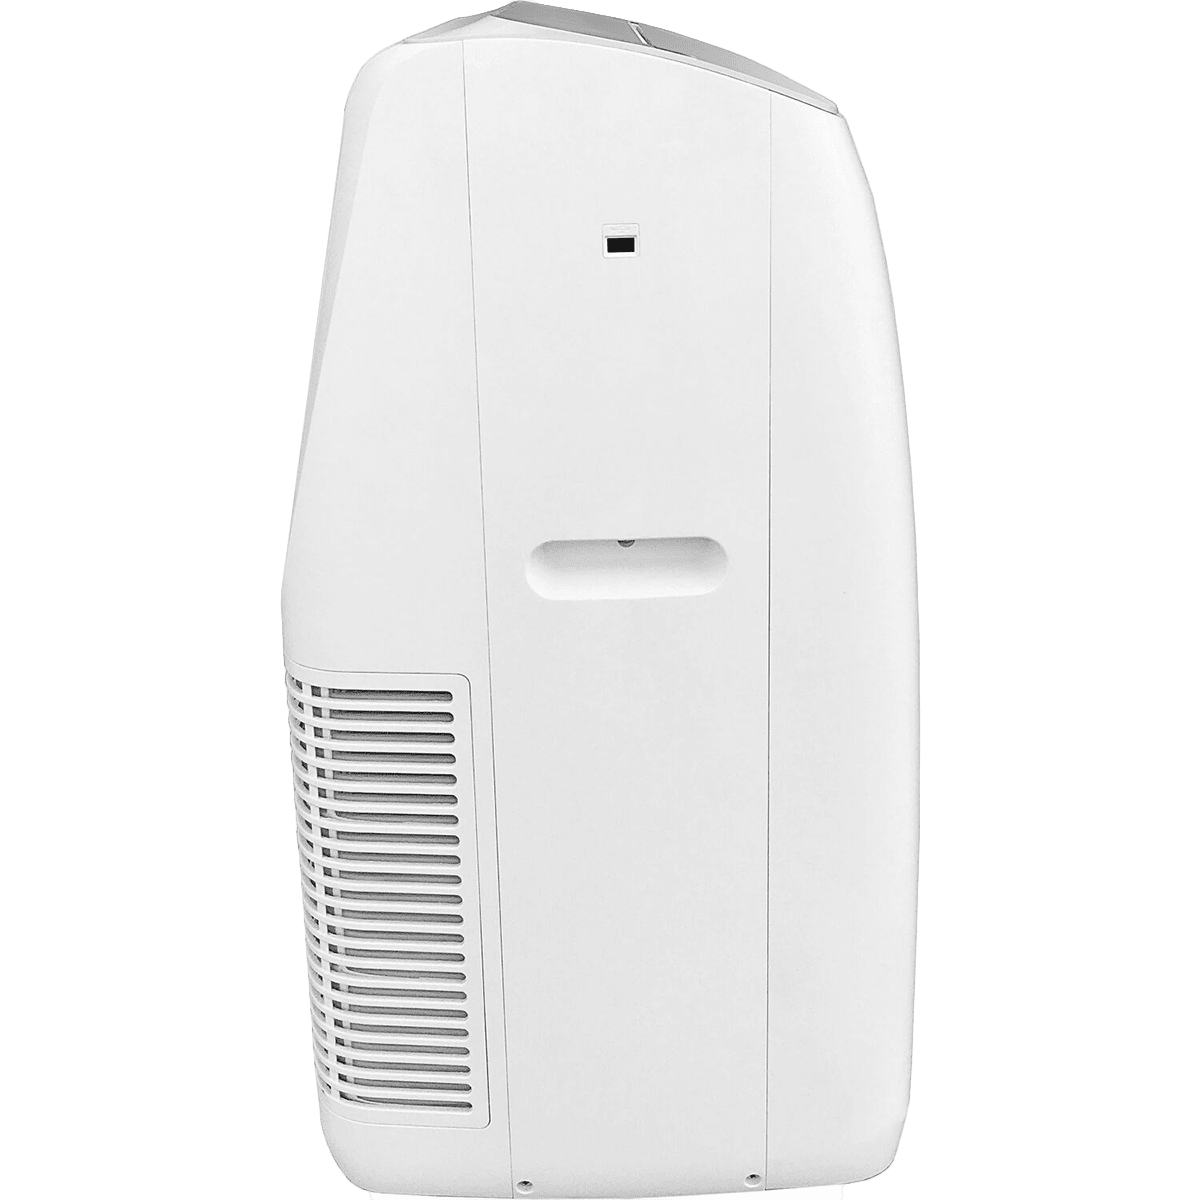 https://s3-assets.sylvane.com/media/images/products/arctic-wind-2ap14000a-14000-btu-portable-air-conditioner-side-1.png